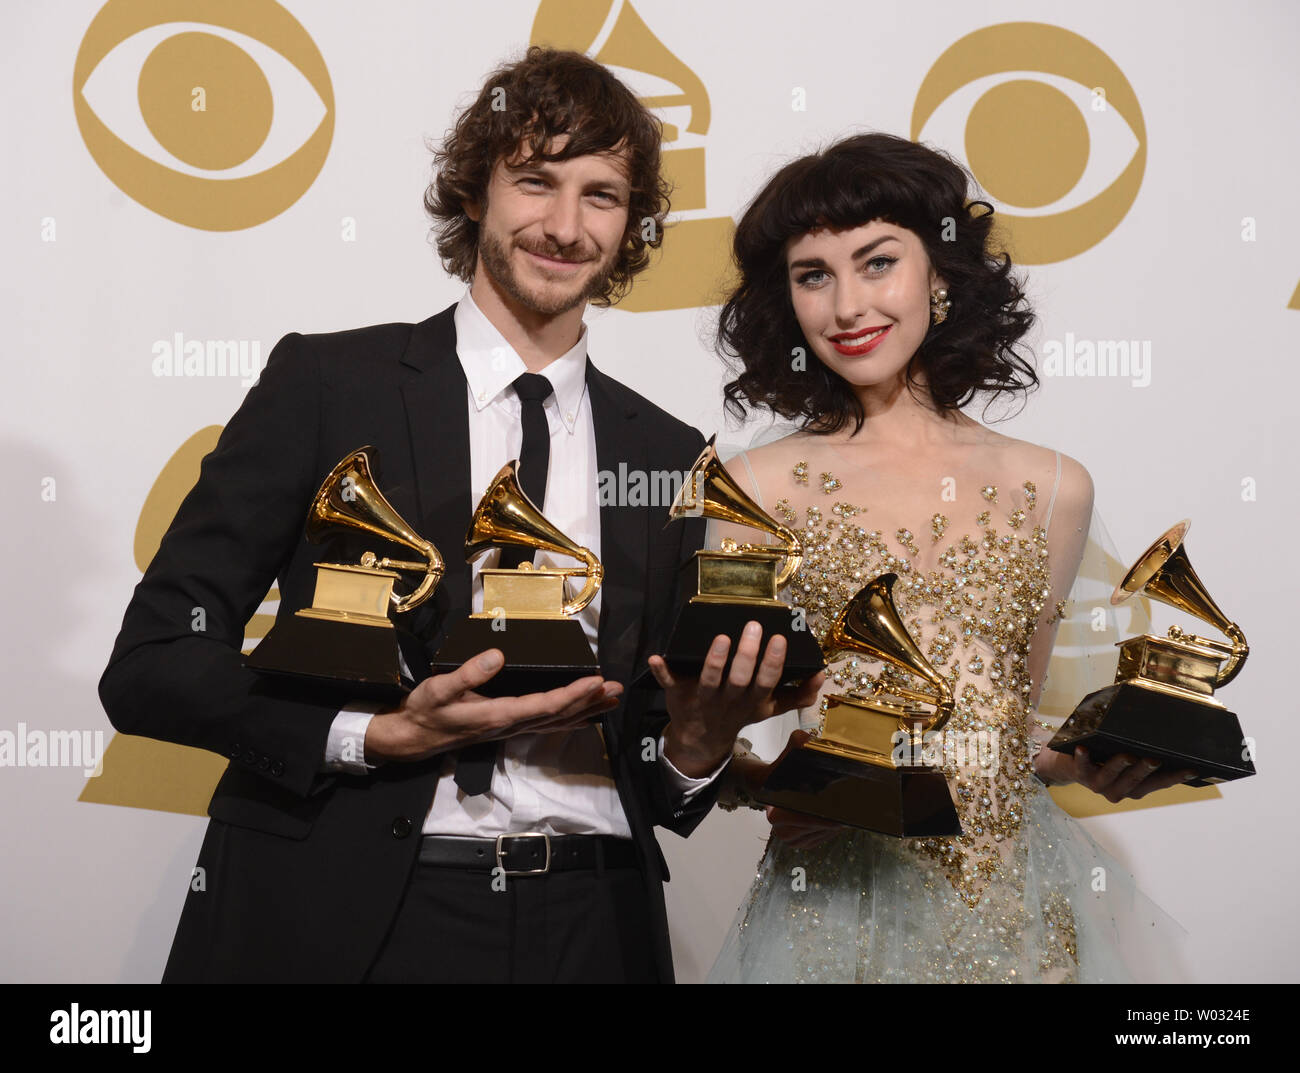 Gotye and Kimbra appear backstage with the Grammys they won at the 55th Grammy Awards at the Staples Center in Los Angeles on February 10, 2013.    UPI/Phil McCarten Stock Photo